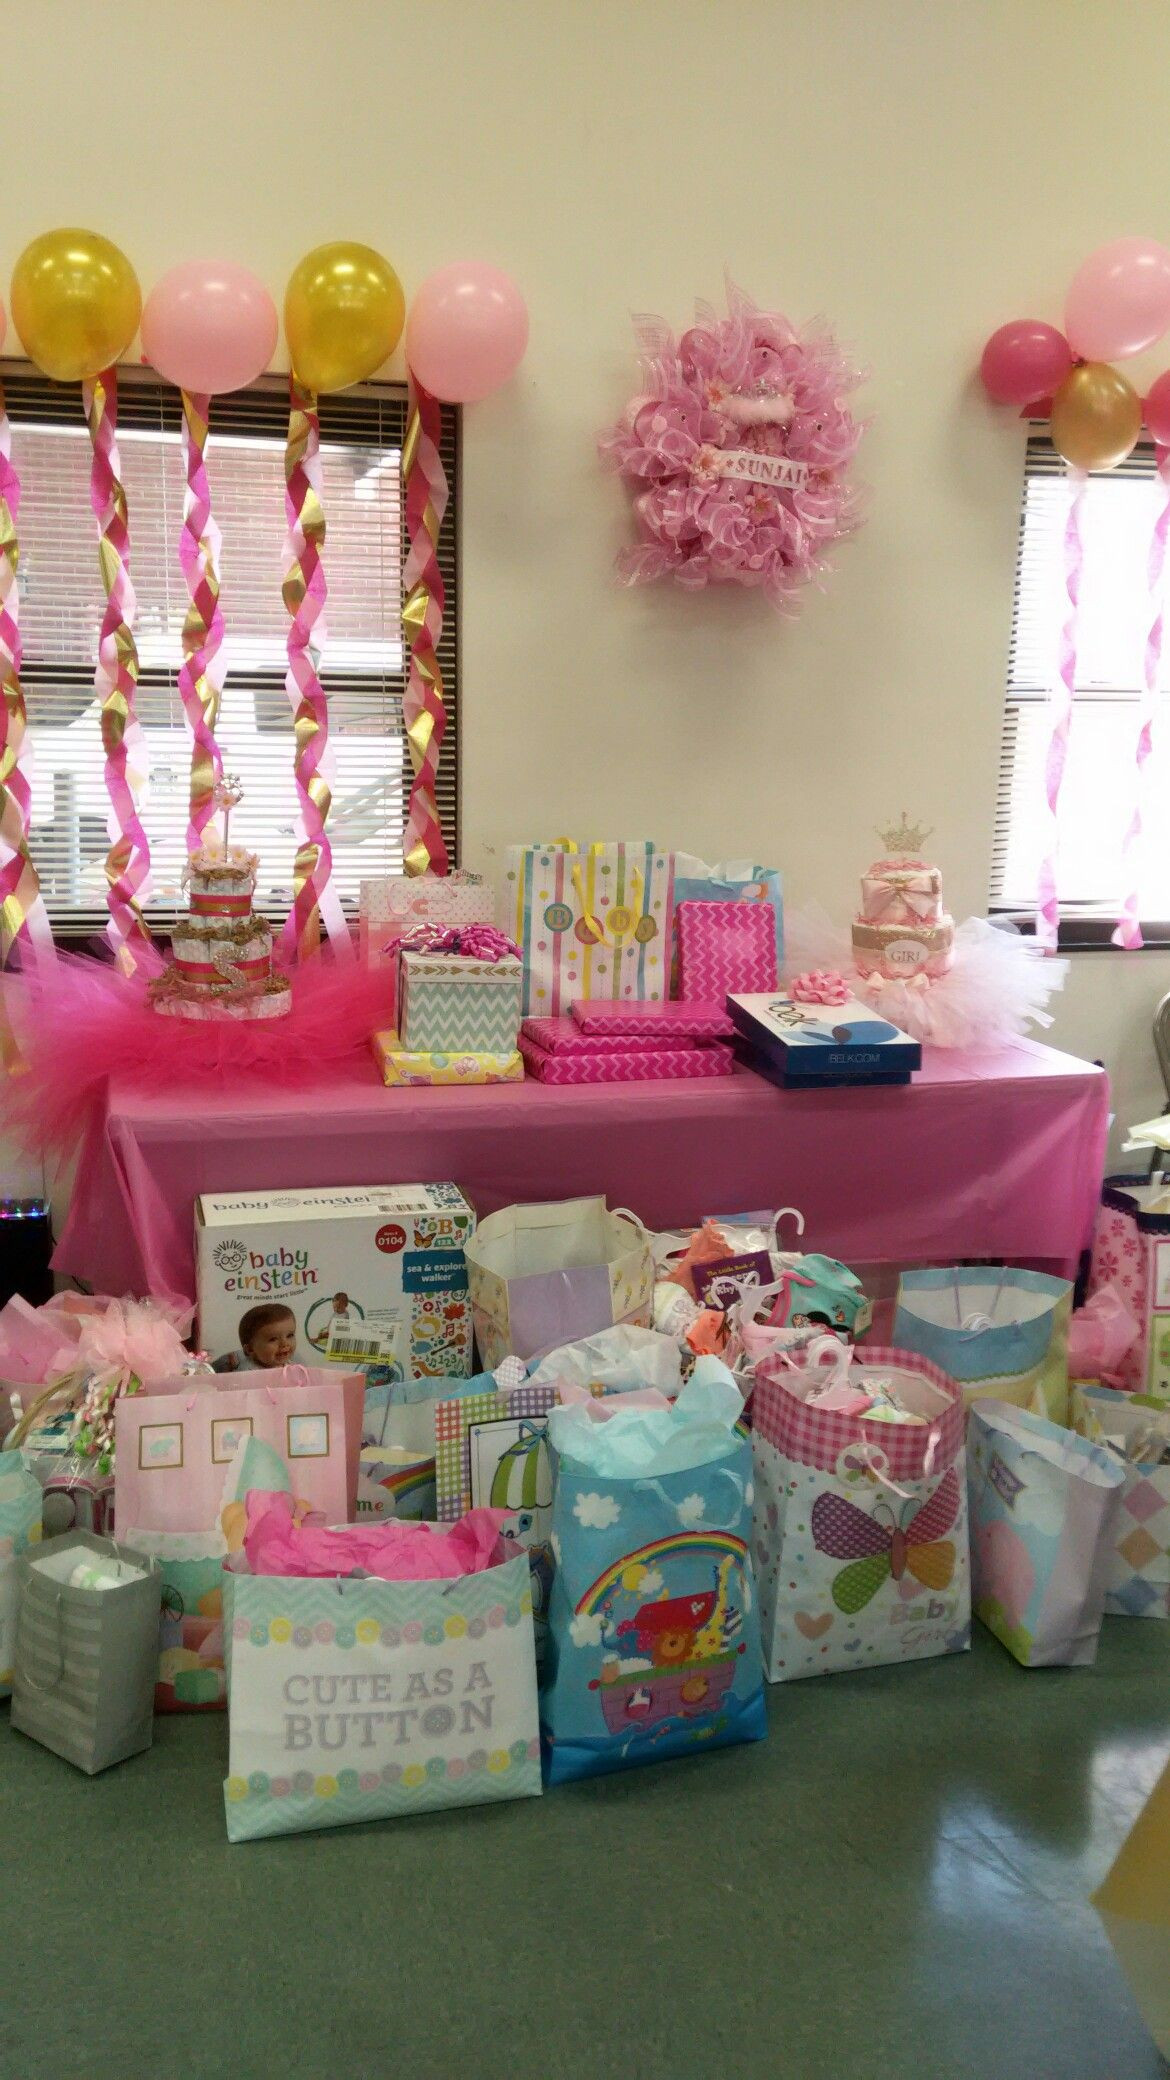 Gift Table Ideas For Baby Shower
 My niece s baby shower t table